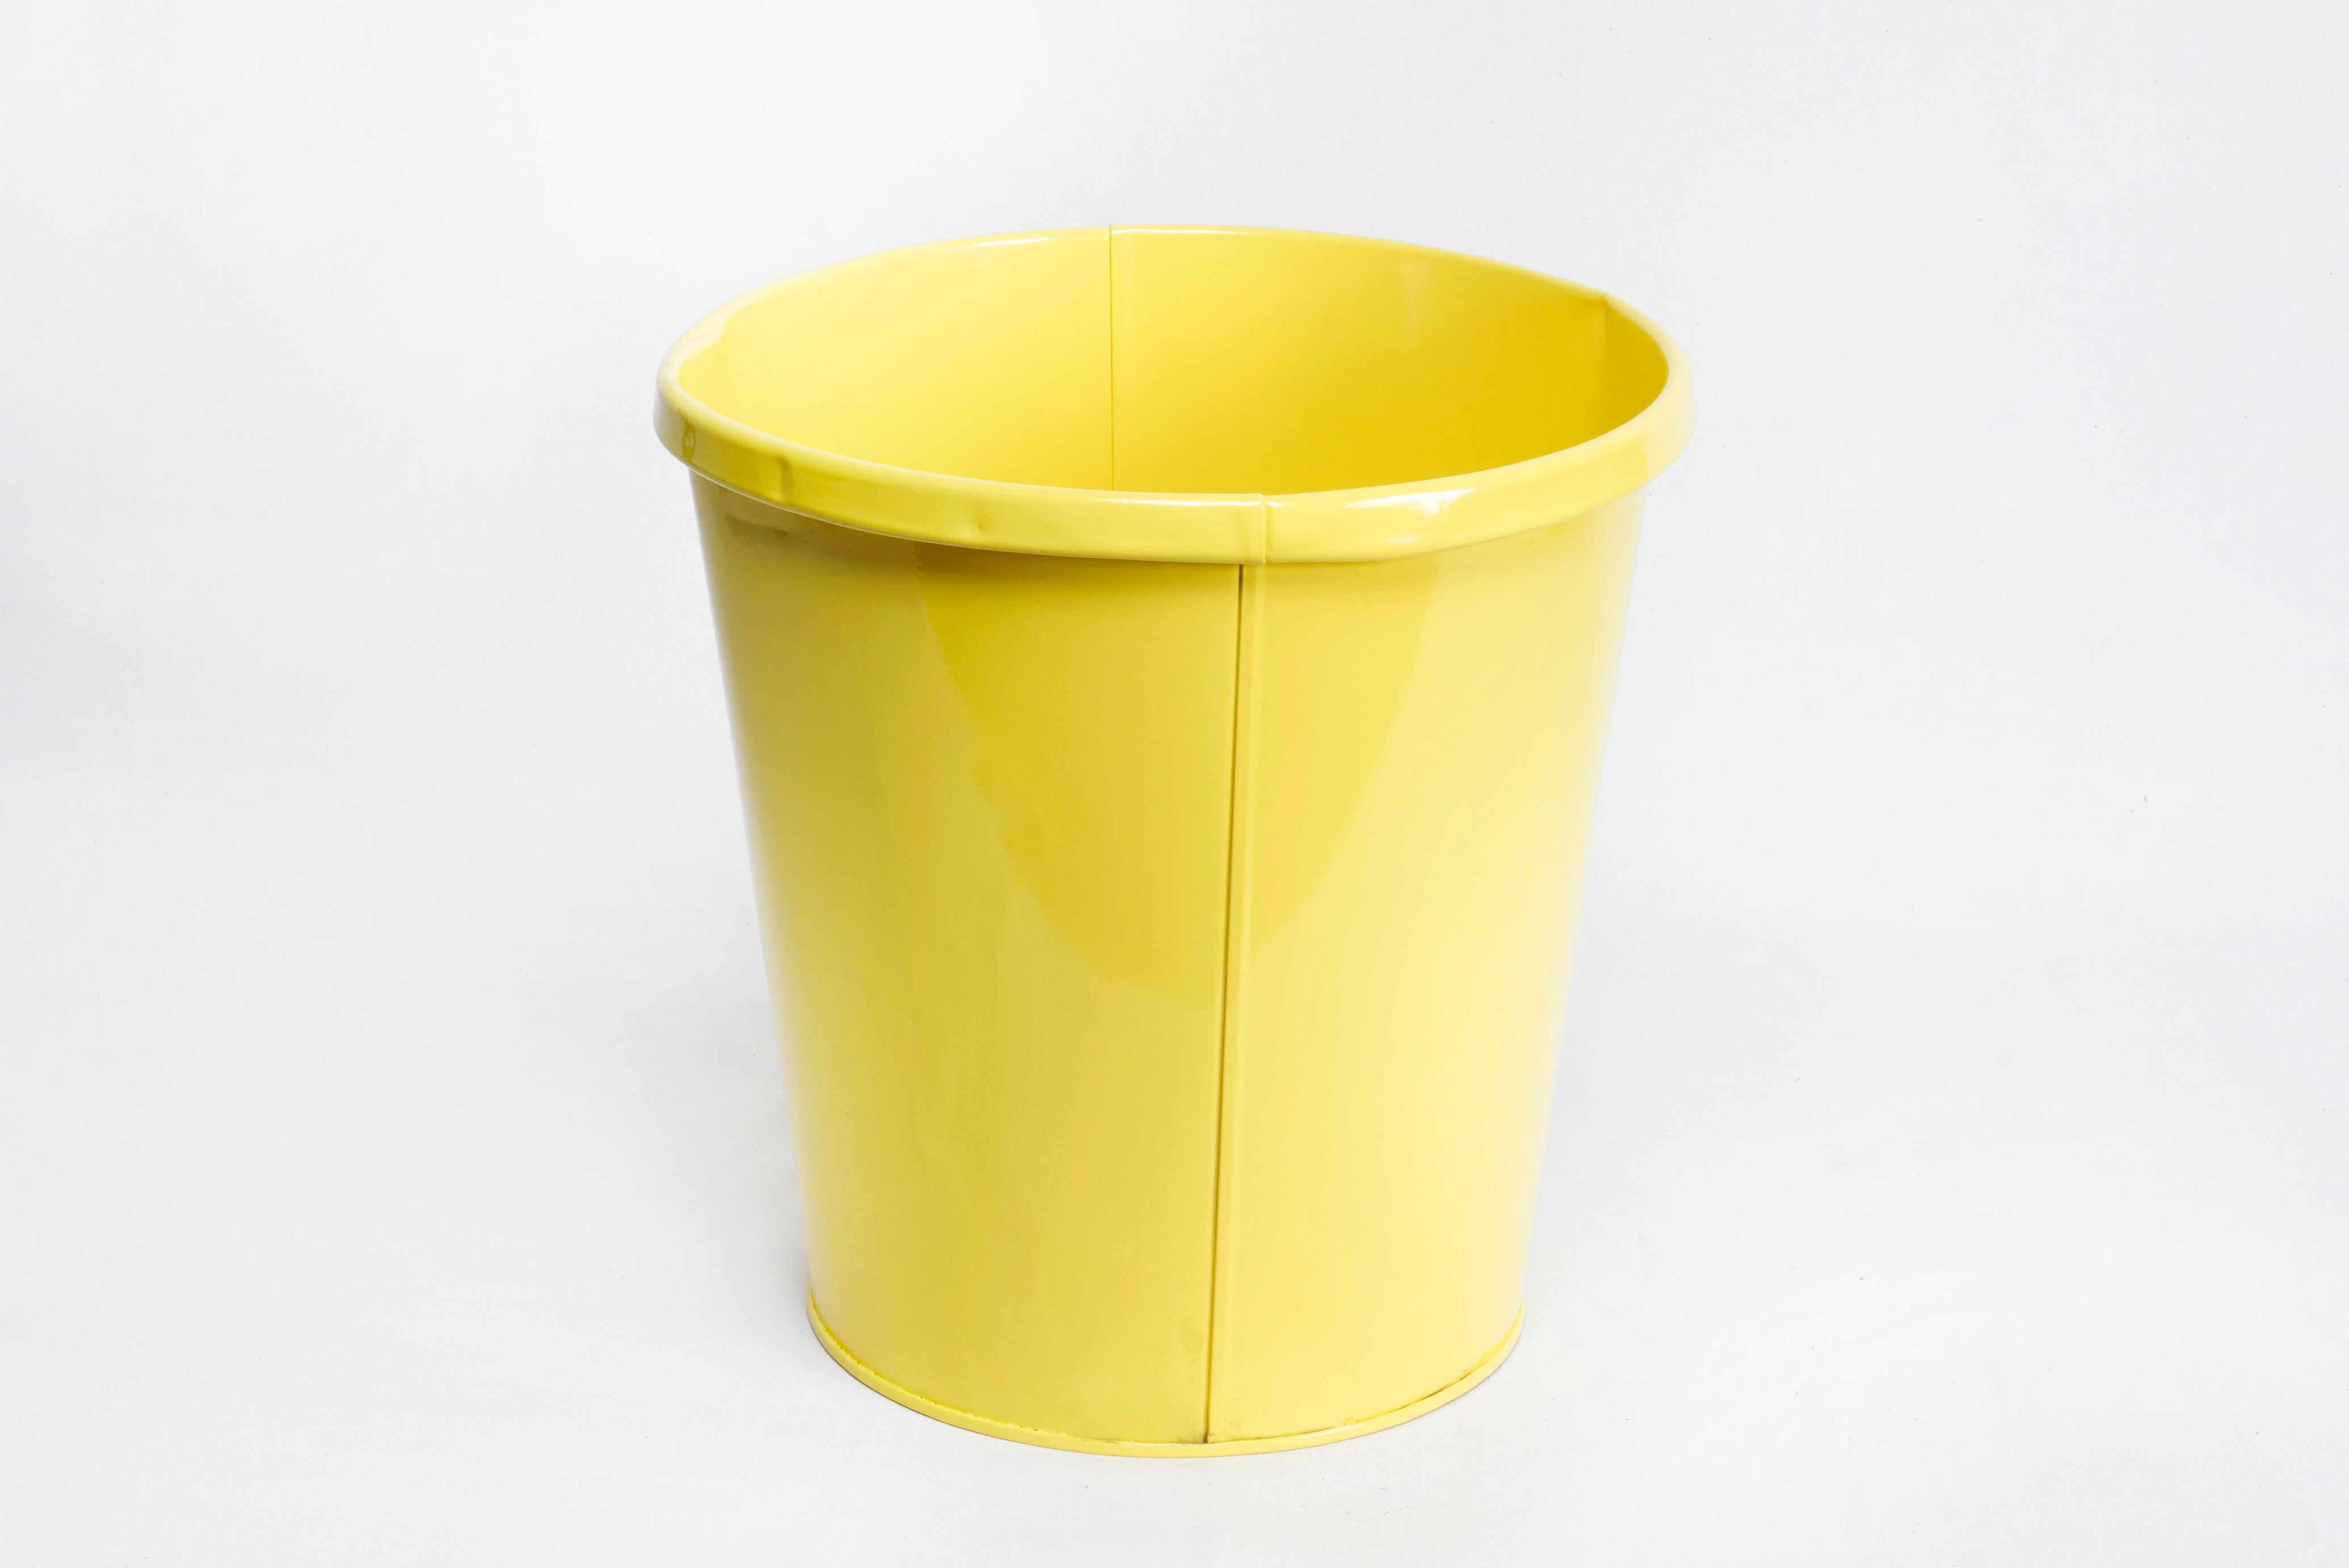 Excellent 1940s steel trash can refinished with a gloss sunshine yellow powder coat. Stamped: LIT-NING PRODUCTS CO, MADE IN USA. Tapered cylinder shape with folded rim. A cheerful addition to your office, bathroom or kitchen. Please note gentle